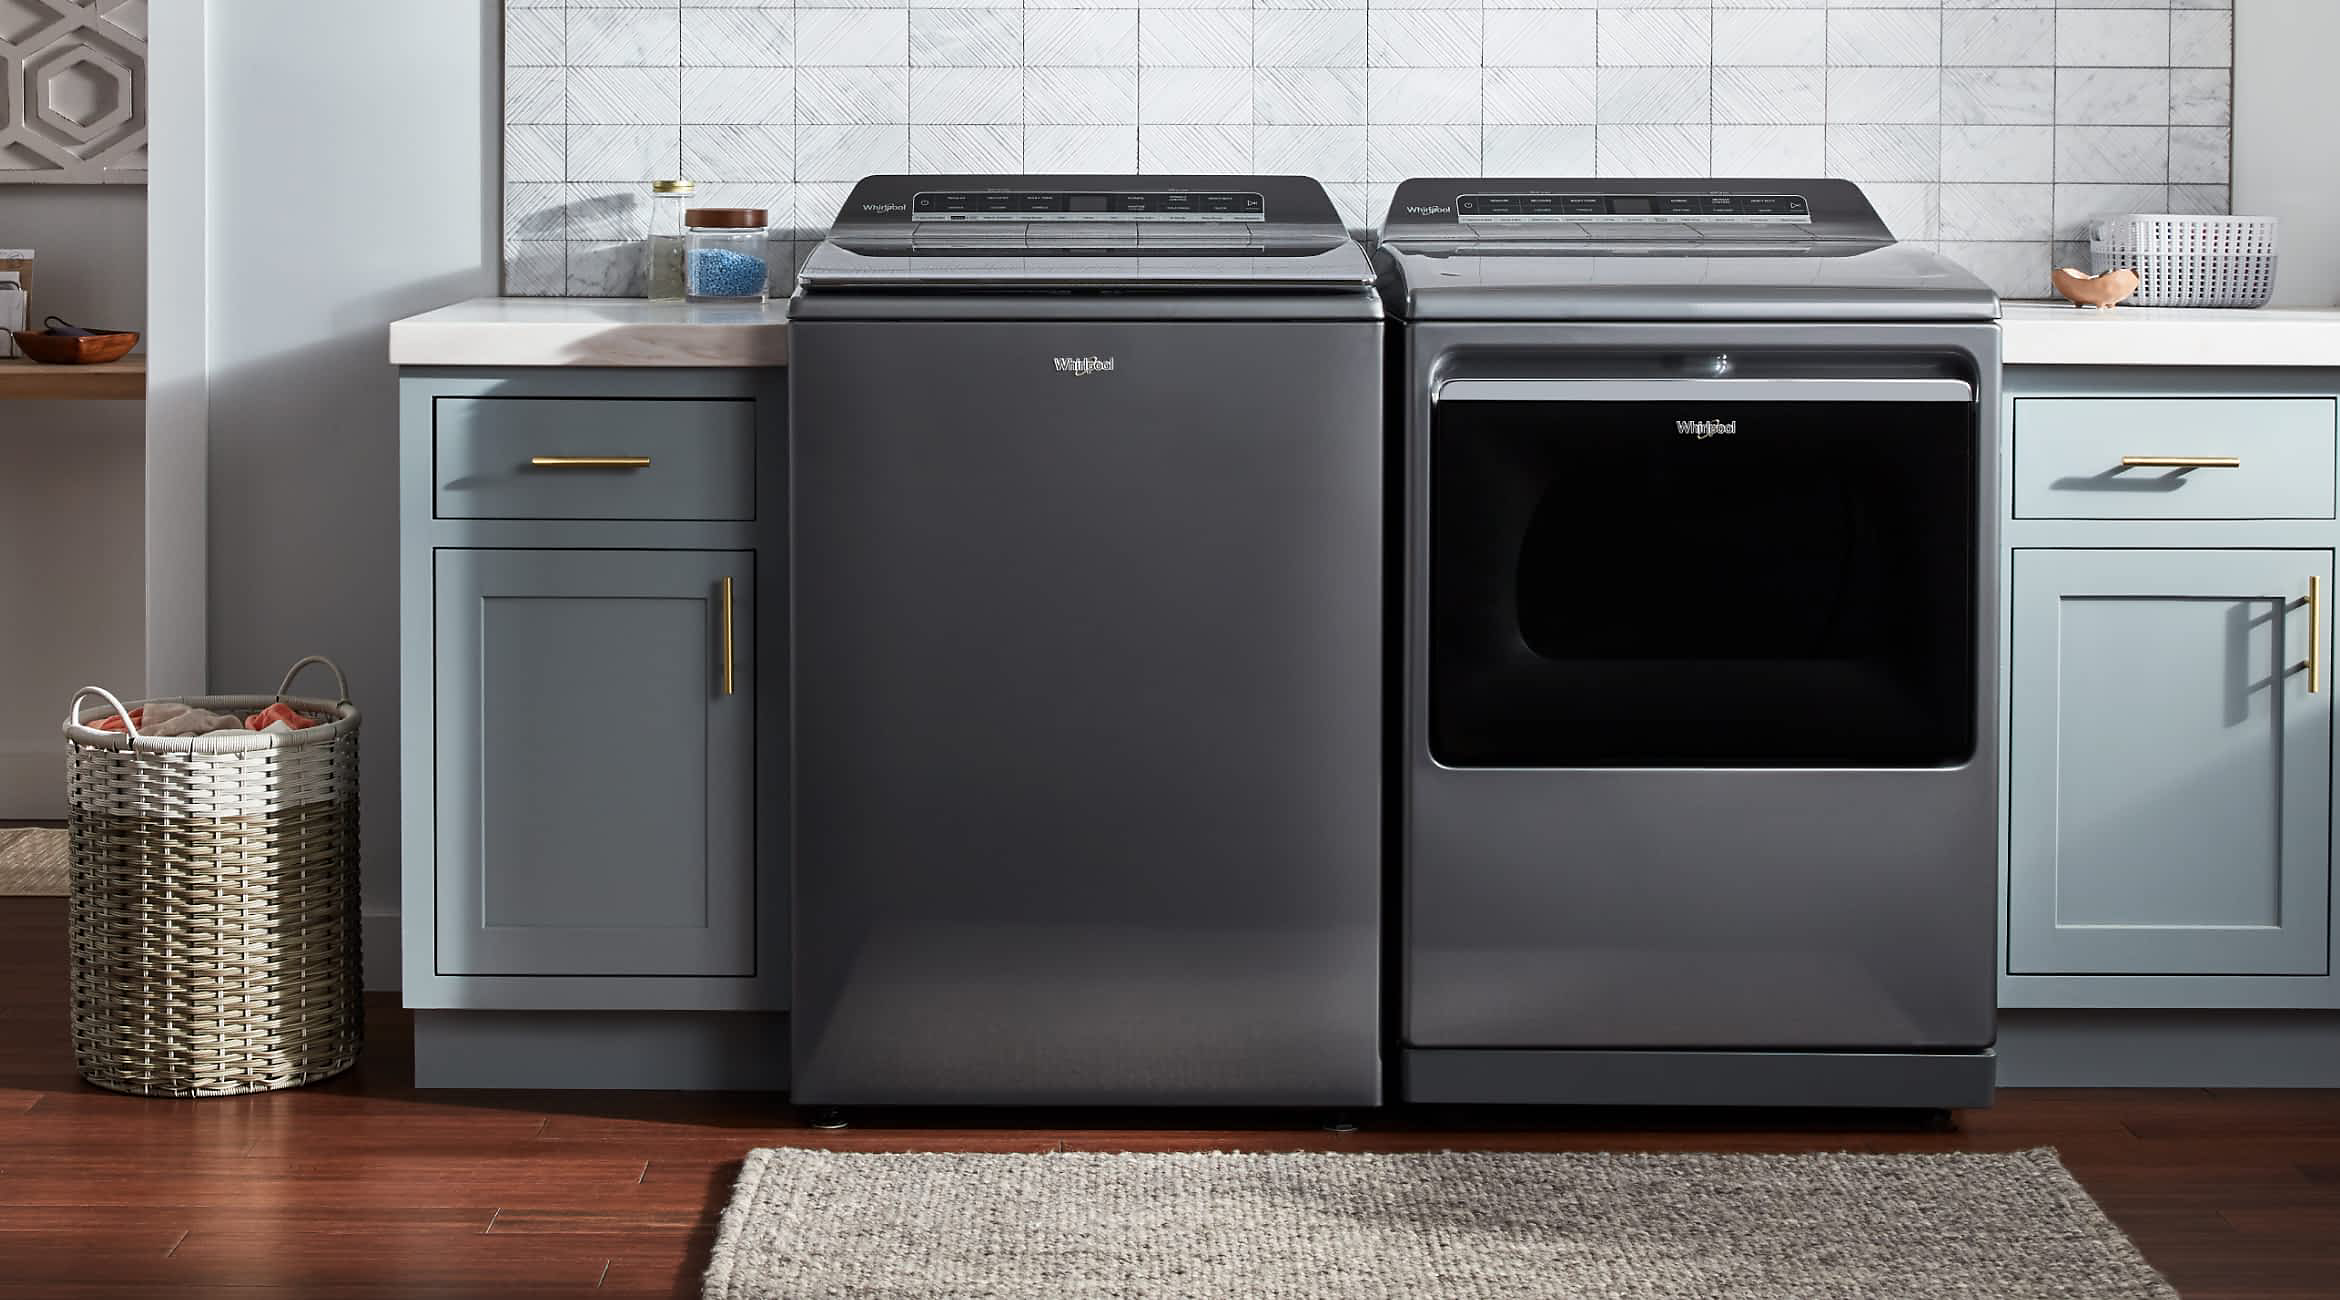 A Whirlpool® Top Load Washer and Matching Dryer